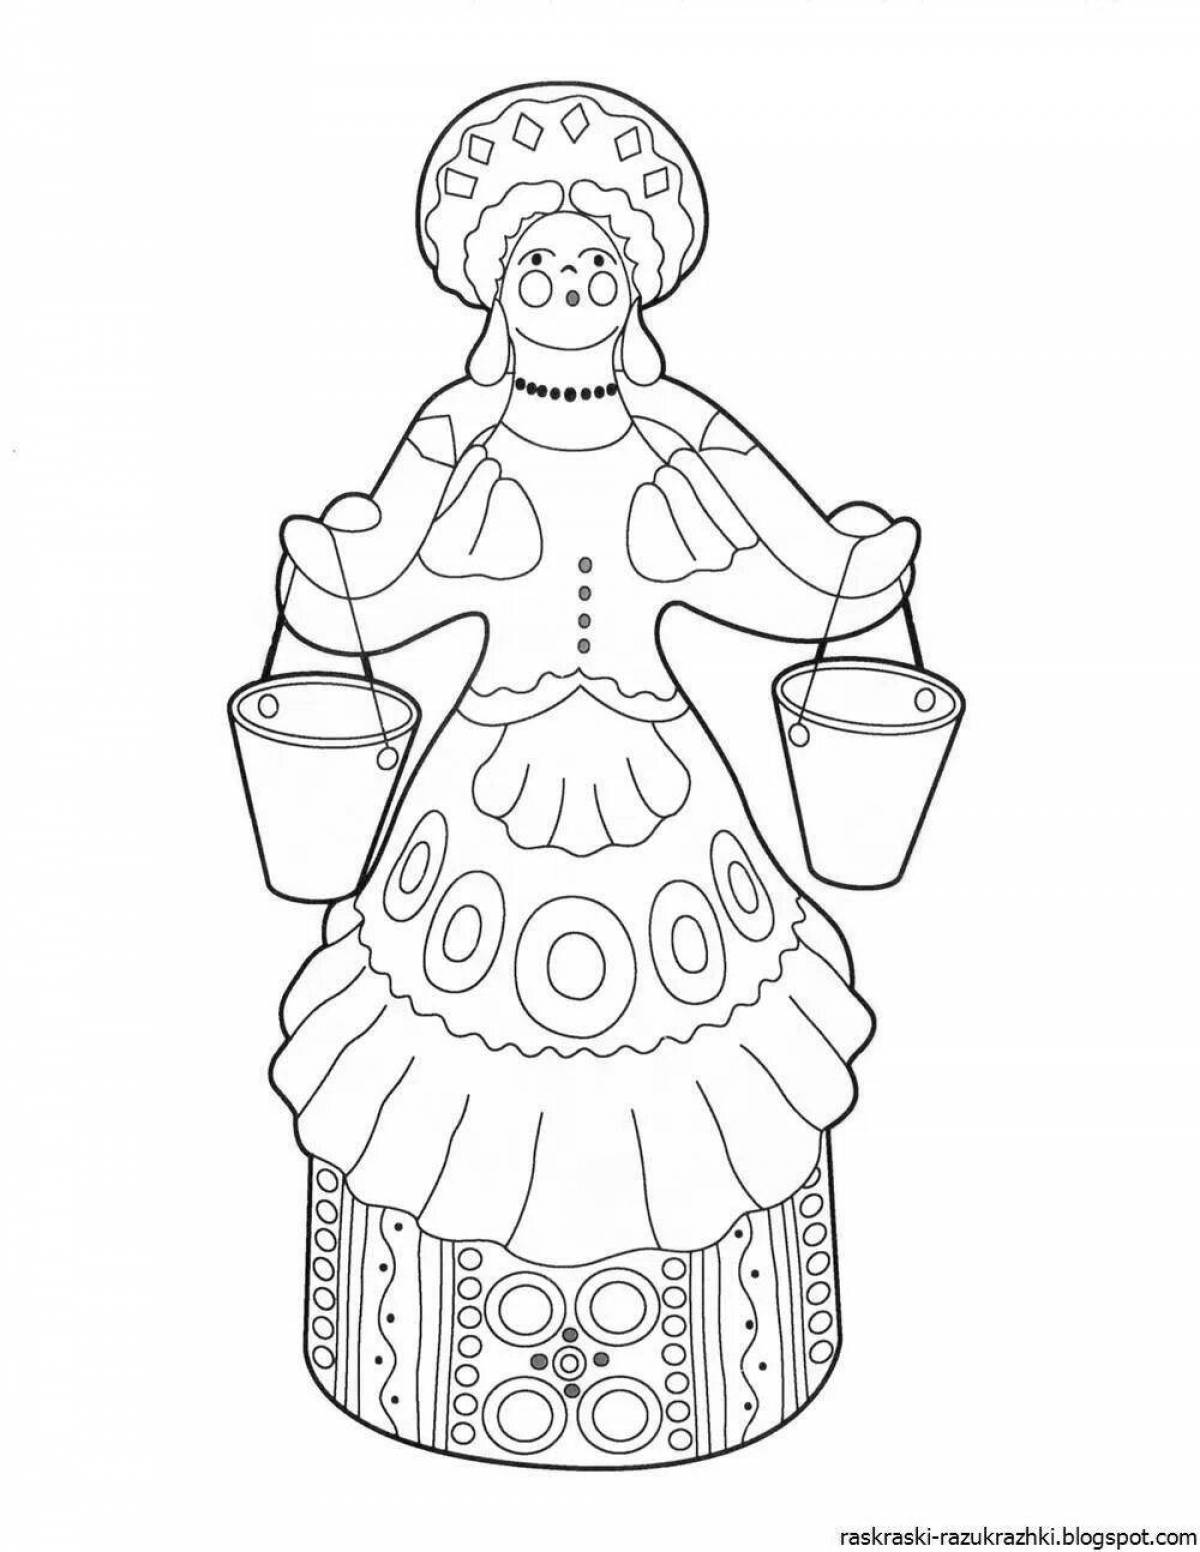 Coloring page wonderful Russian folk crafts